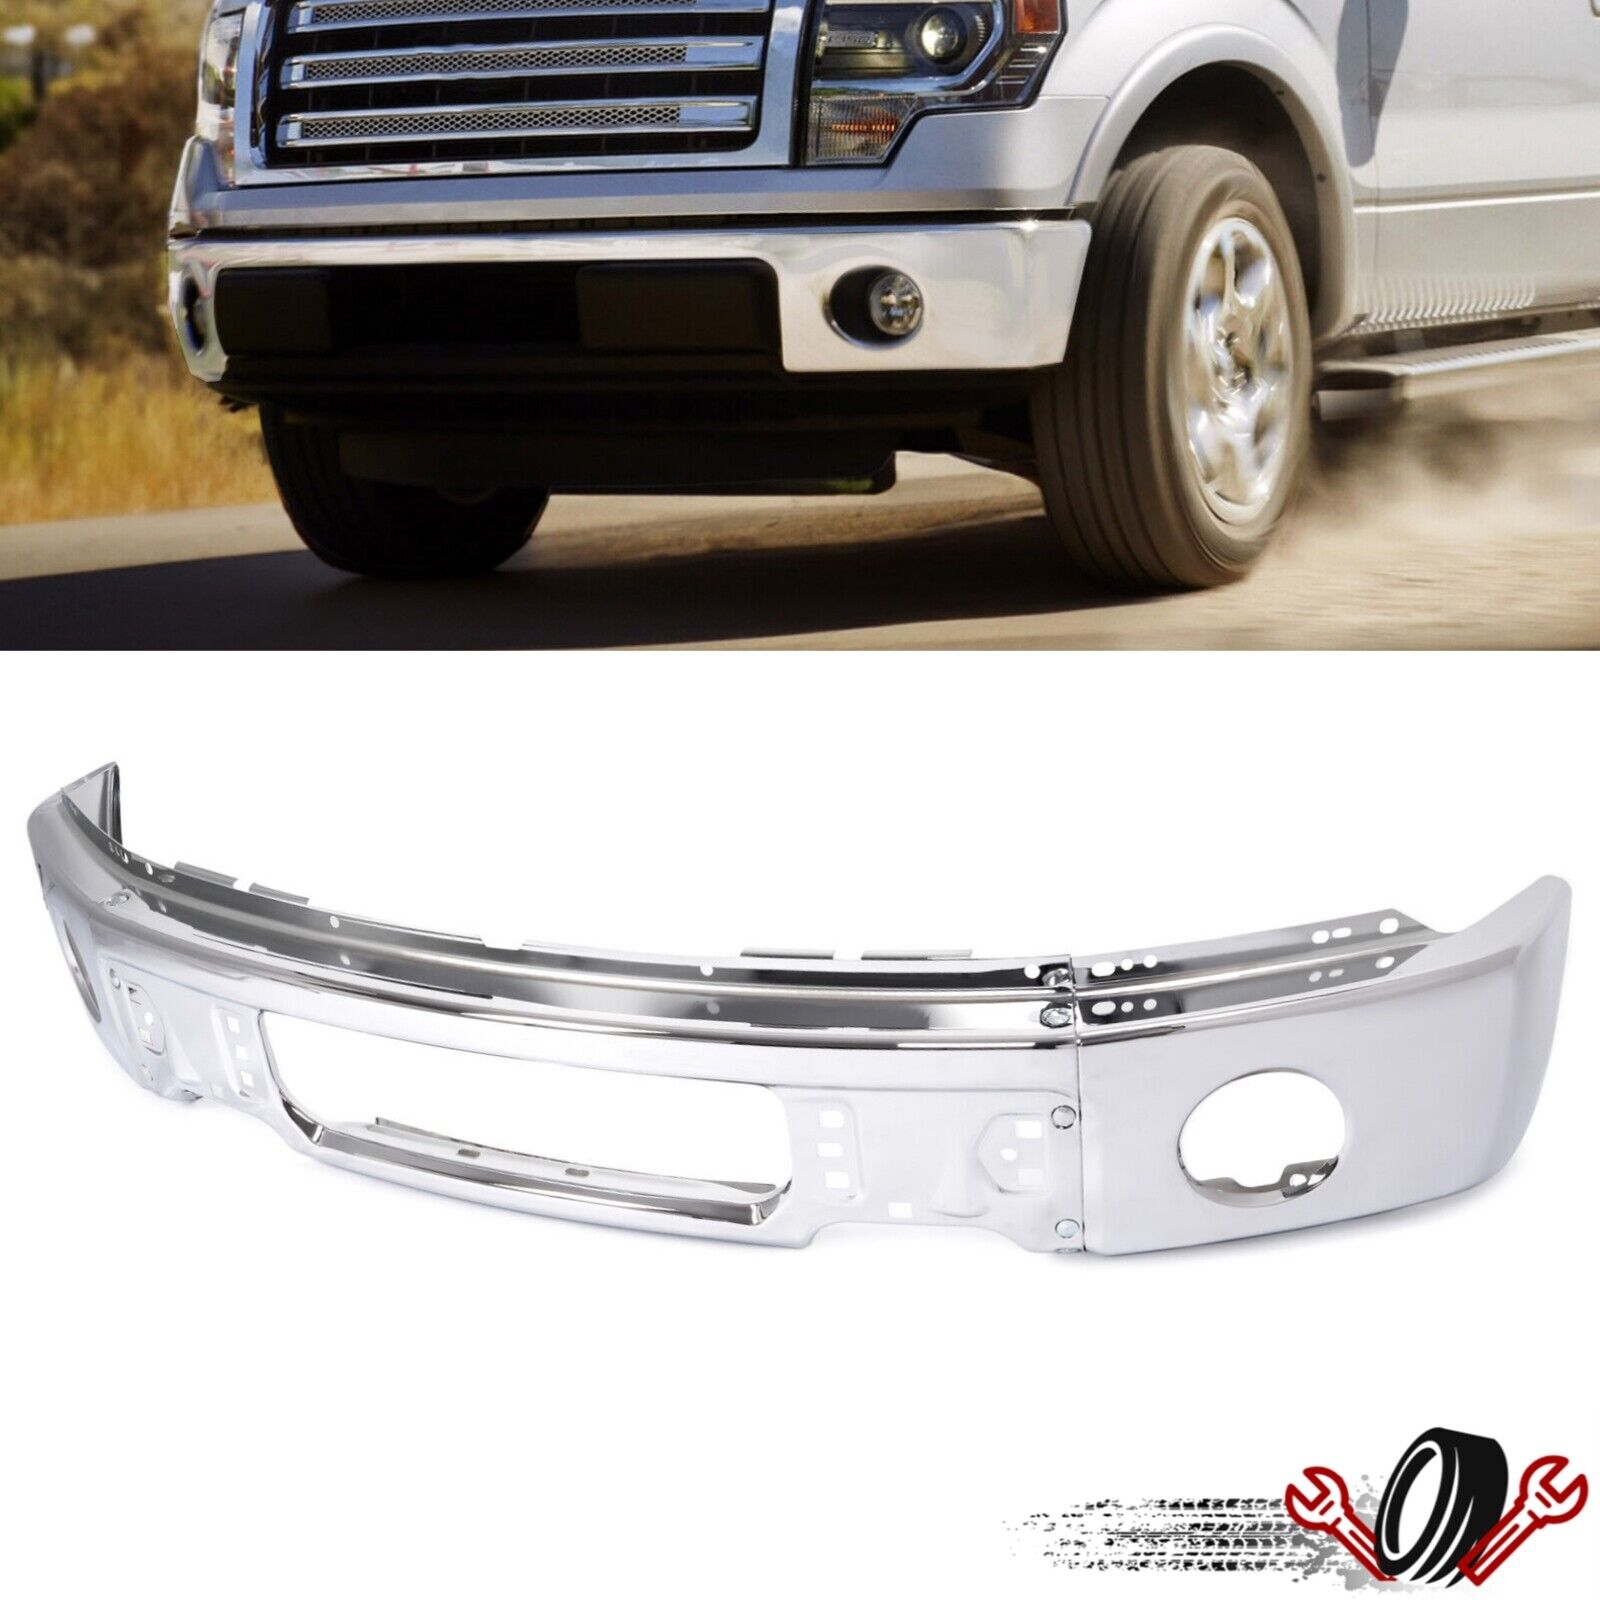 Chrome Front Steel Bumper Face Bar for Ford F150 Pickup 09-14 w/ Fog Light Hole